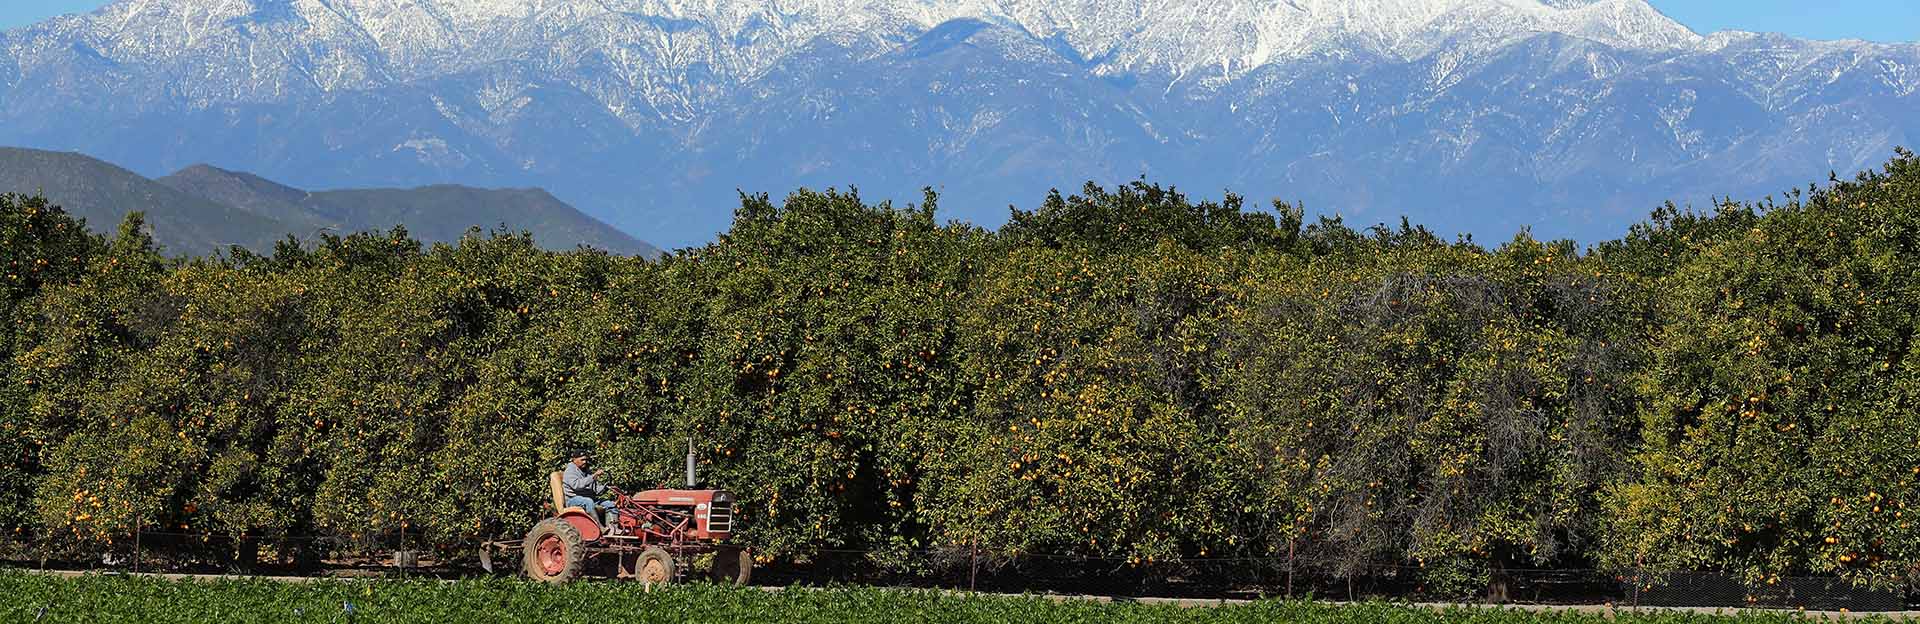 Agricultural Operations at UCR with tractor in front of Citrus grove and snow-capped mountains (c) UCR / Stan Lim